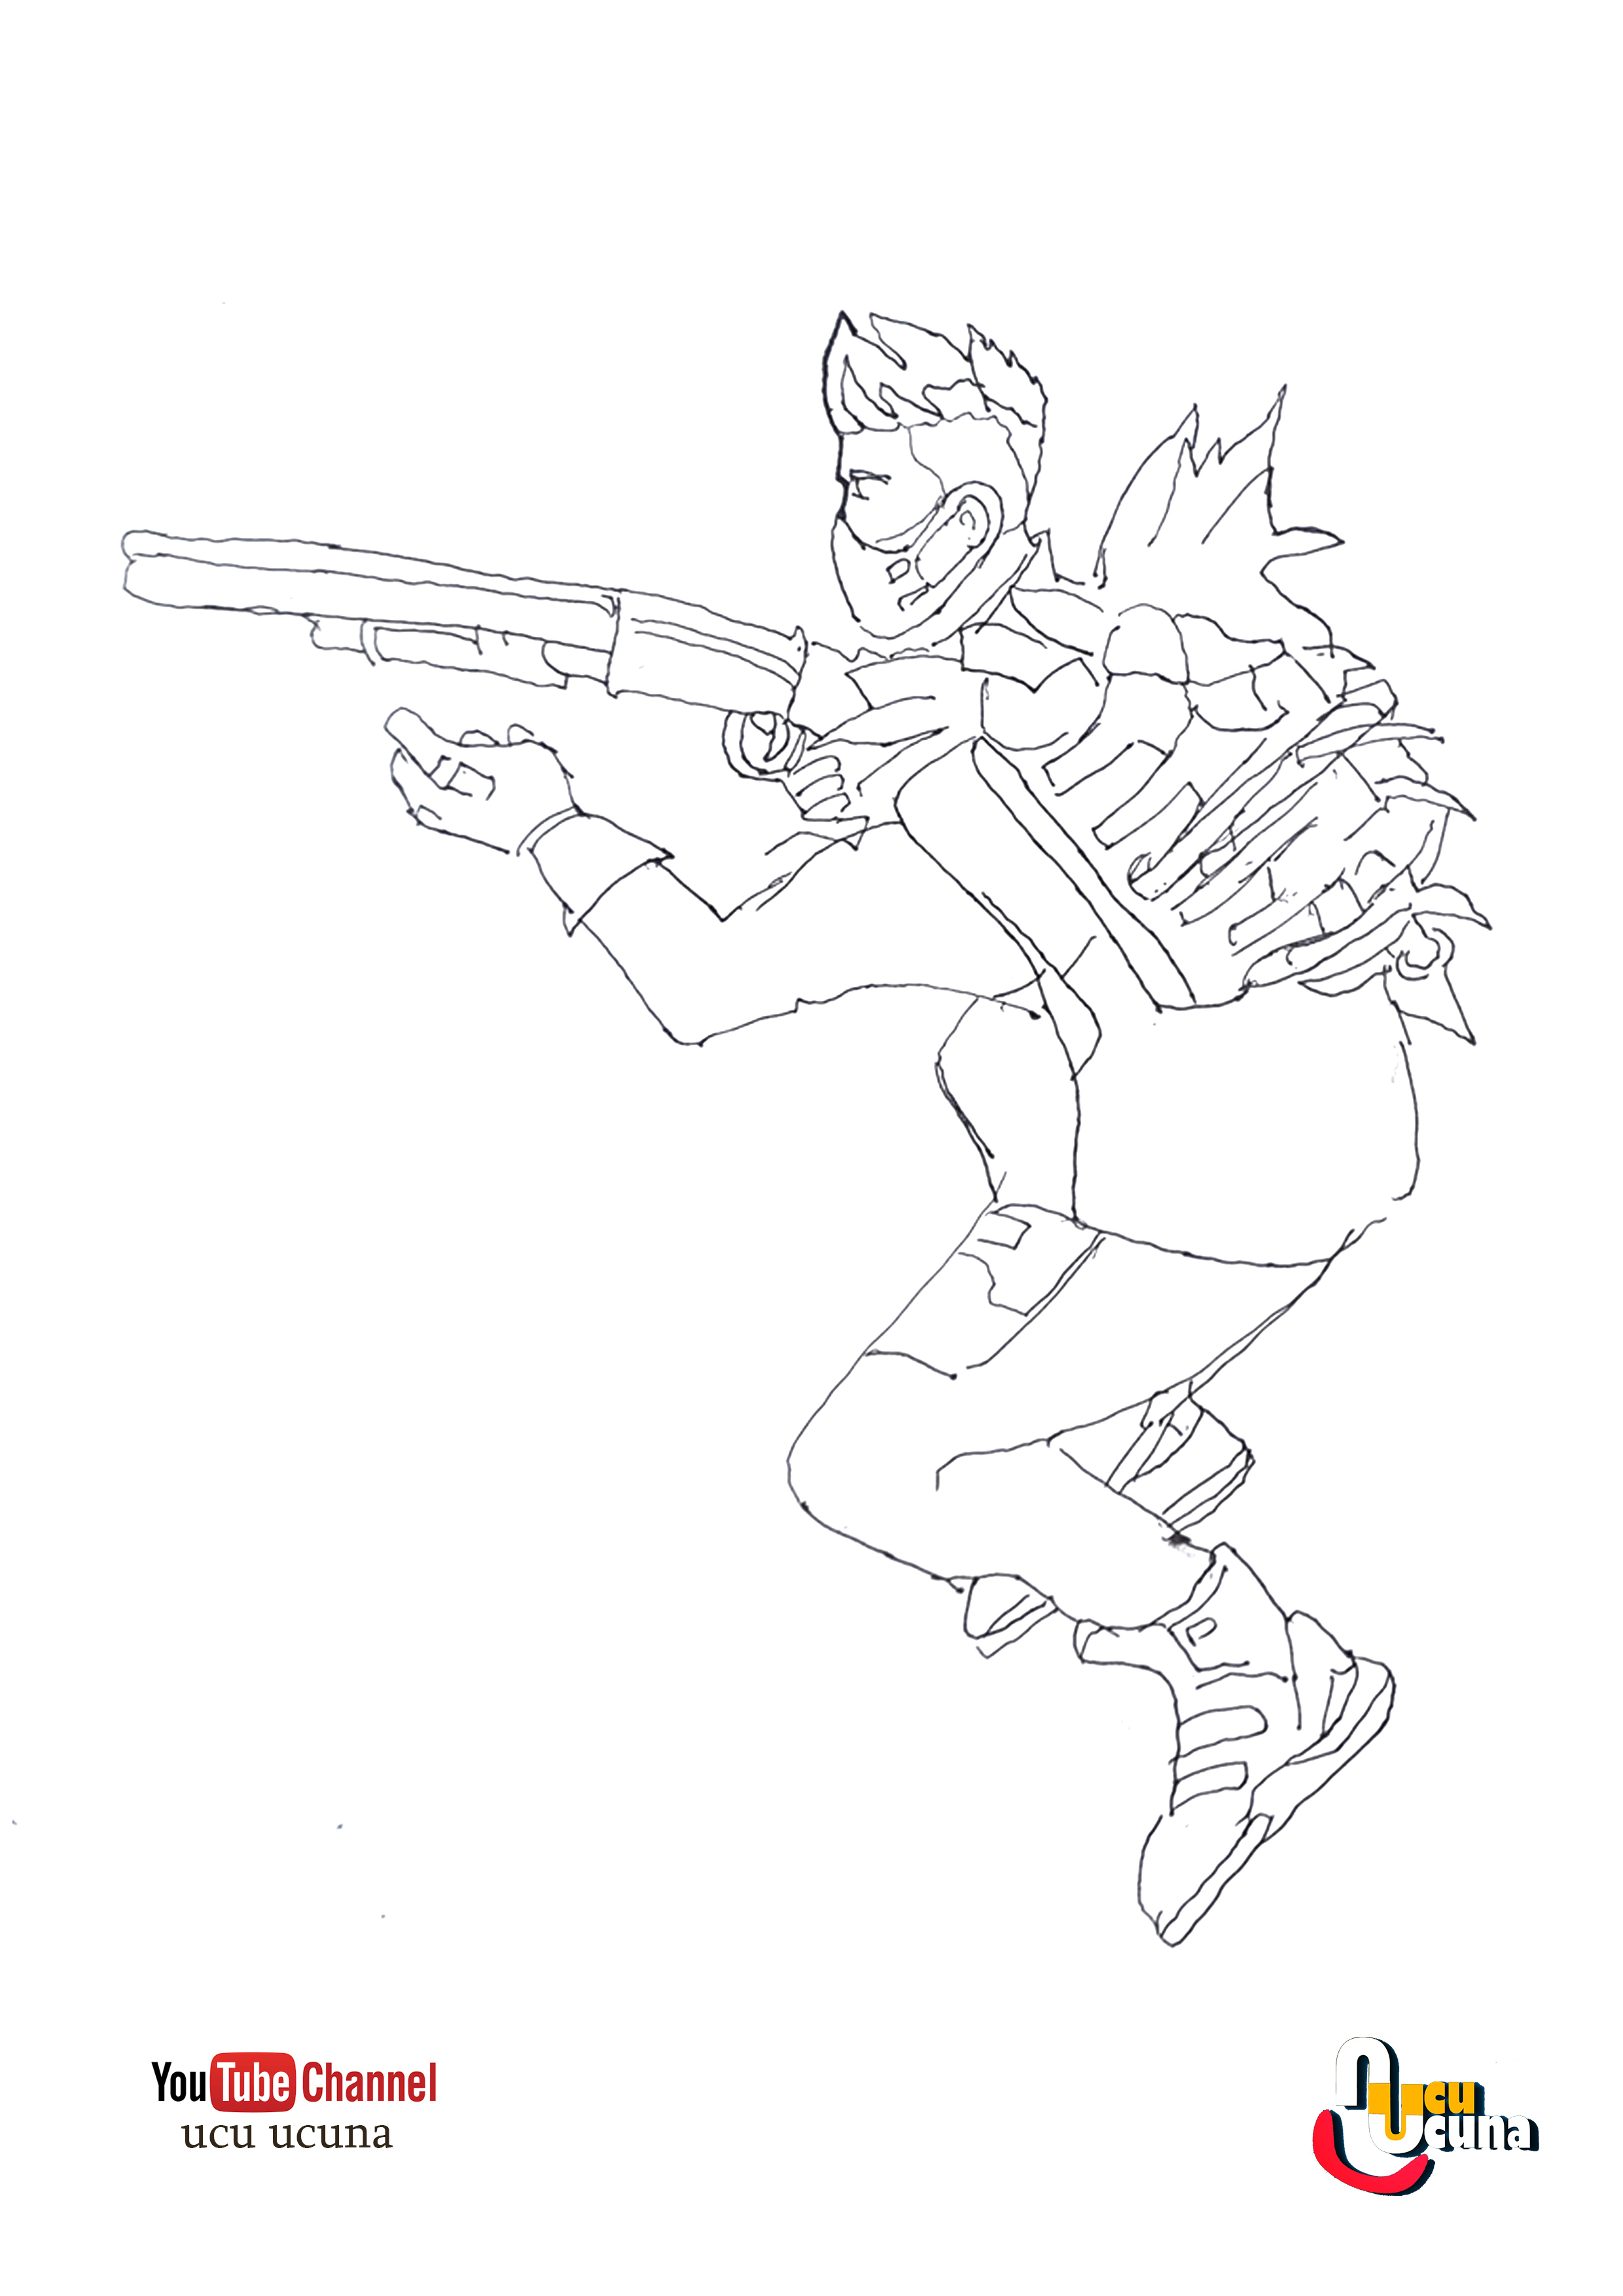 How To Draw Drift Skin From Fortnite Game on GetDrawings.com